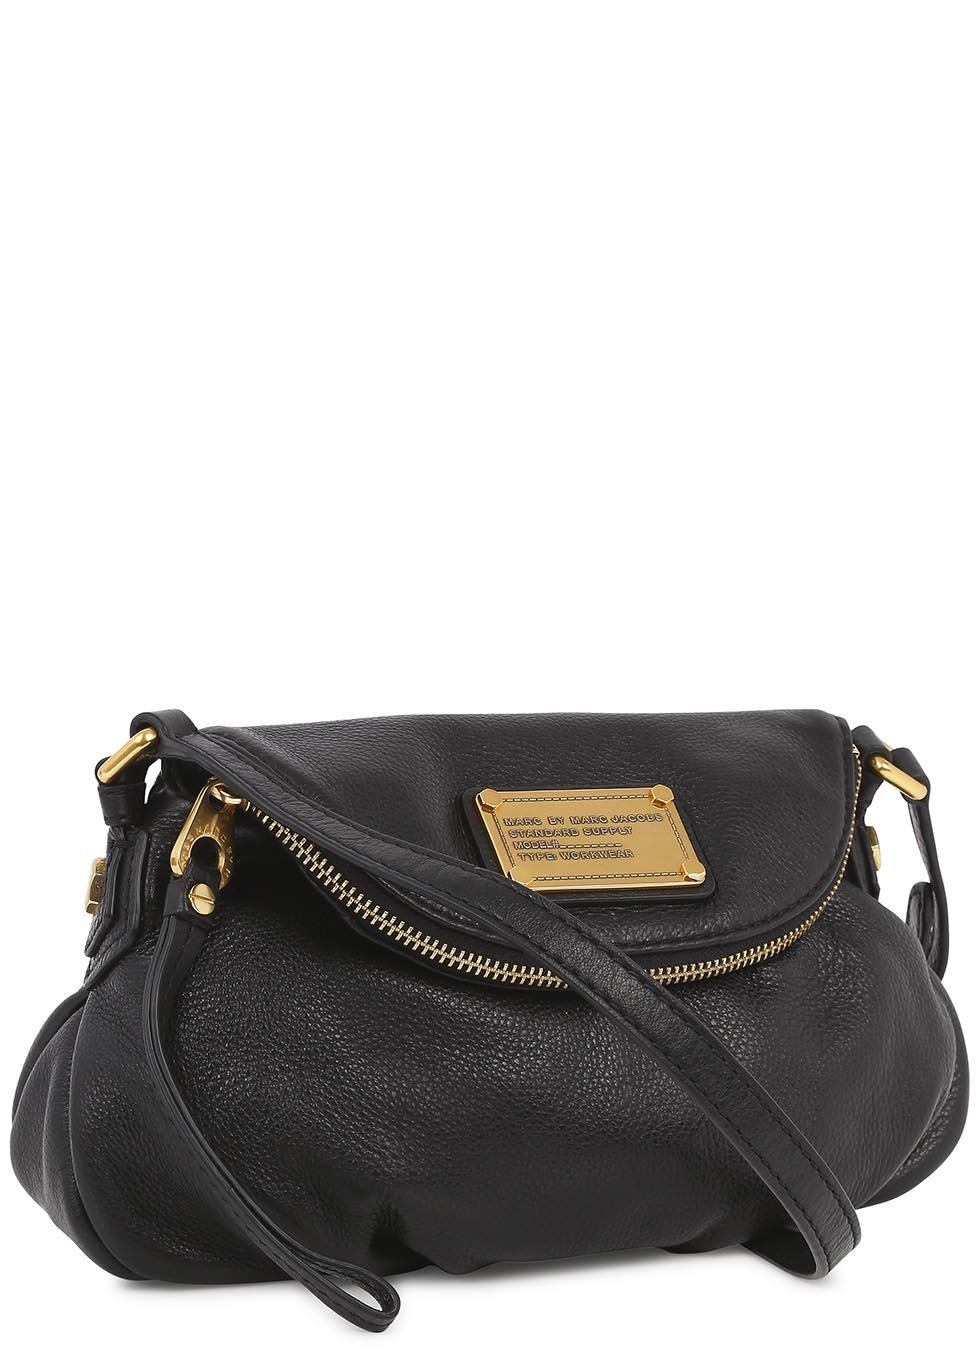 Marc by marc jacobs Natasha Leather Cross-Body Bag in Black | Lyst